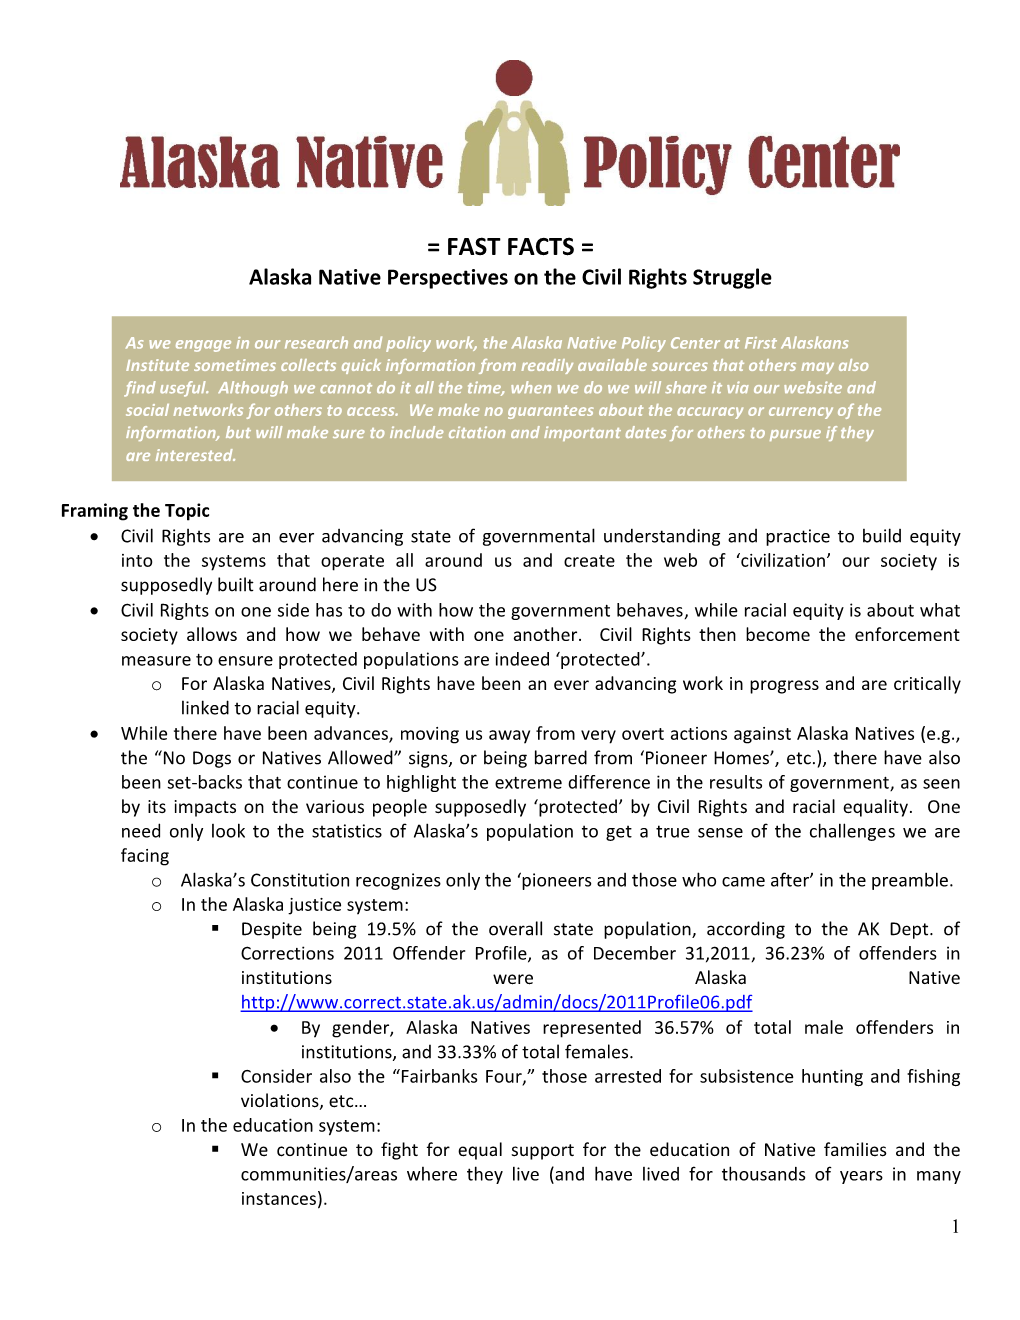 = FAST FACTS = Alaska Native Perspectives on the Civil Rights Struggle